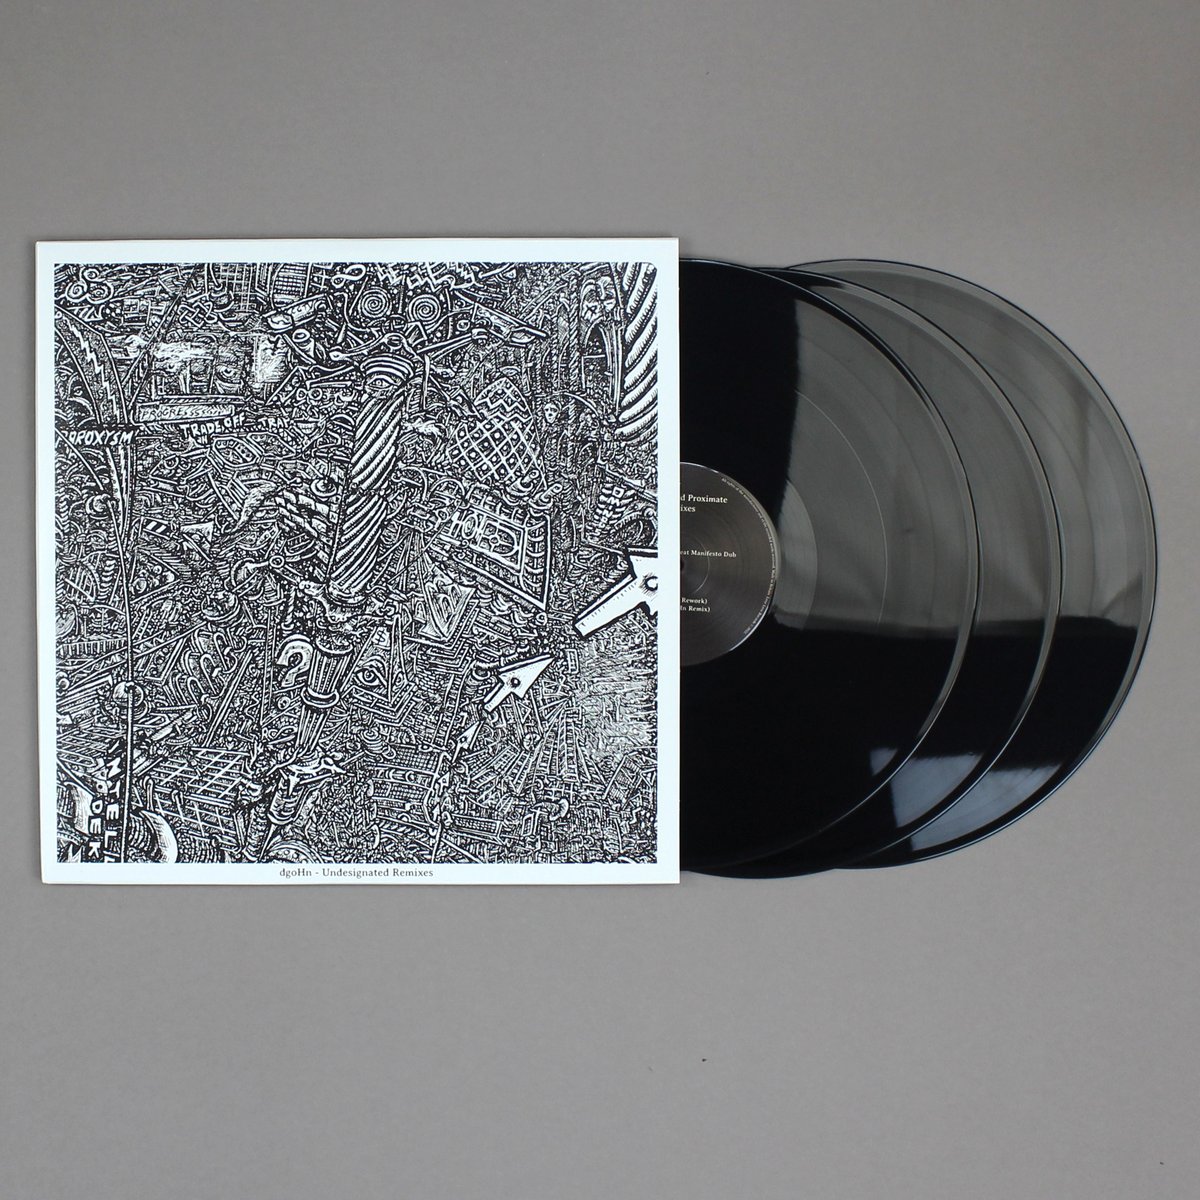 Shipping Now: dgoHn - Undesignated Remixes @loveloverecords bleep.com/release/316514 With redos that range from blissed out dub to furious hardcore, Undesignated Remixes works like a defacto survey of everything cool in contemporary underground dance. @dgoHn_Music